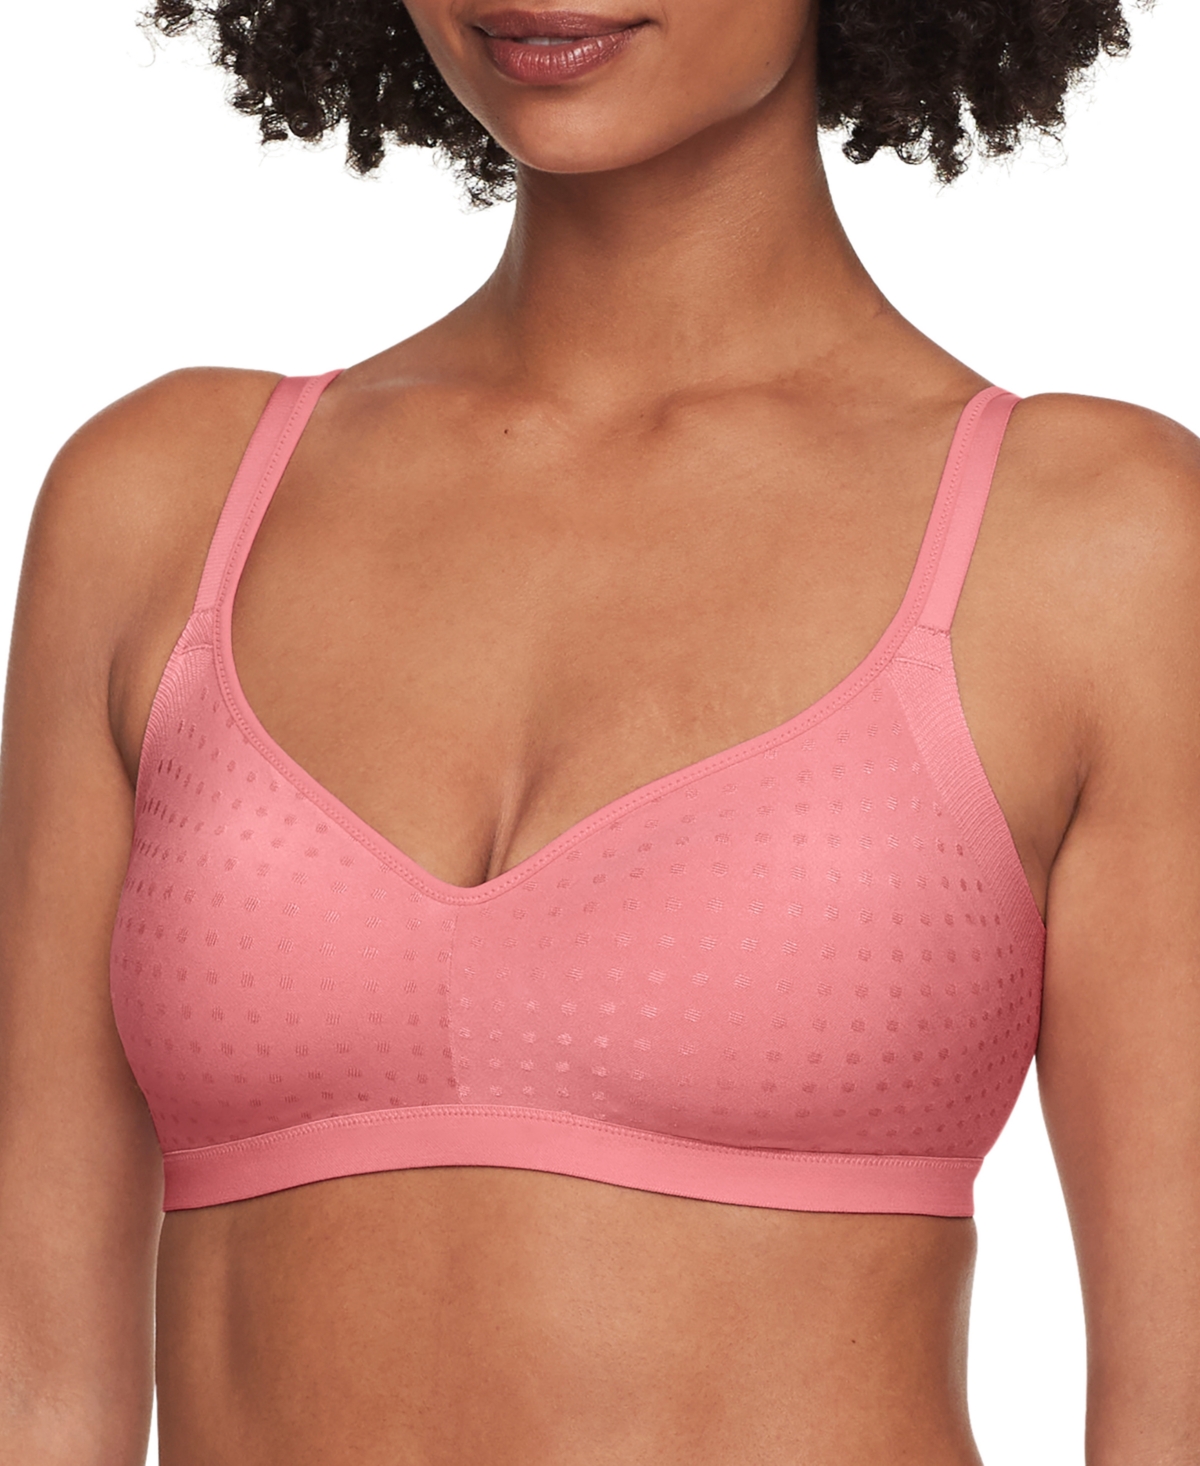 Women's Easy Does It Underarm-Smoothing Wireless Lightly Lined Comfort Bra RM3911F - Mauveglow